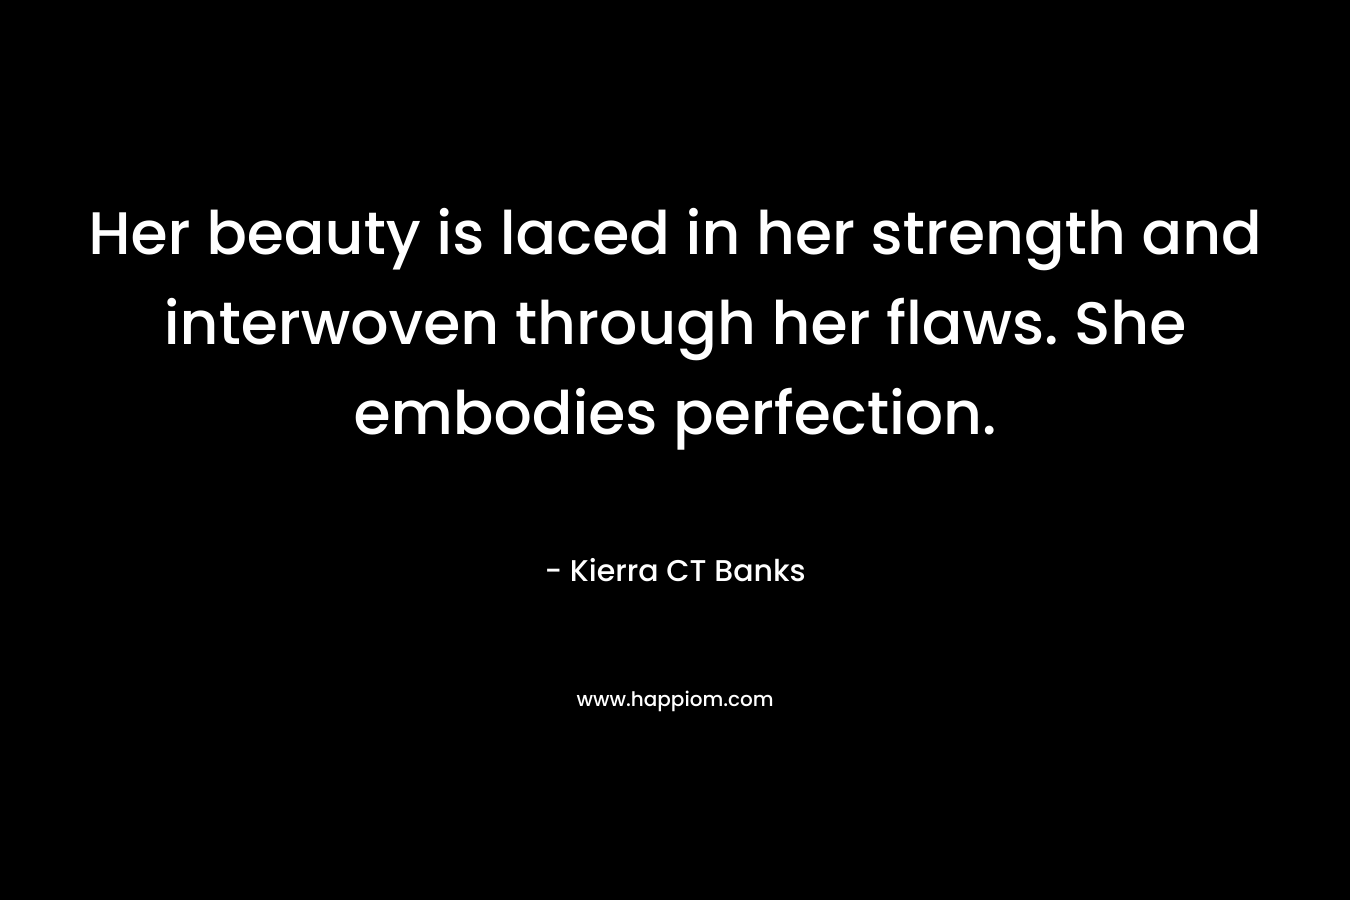 Her beauty is laced in her strength and interwoven through her flaws. She embodies perfection.